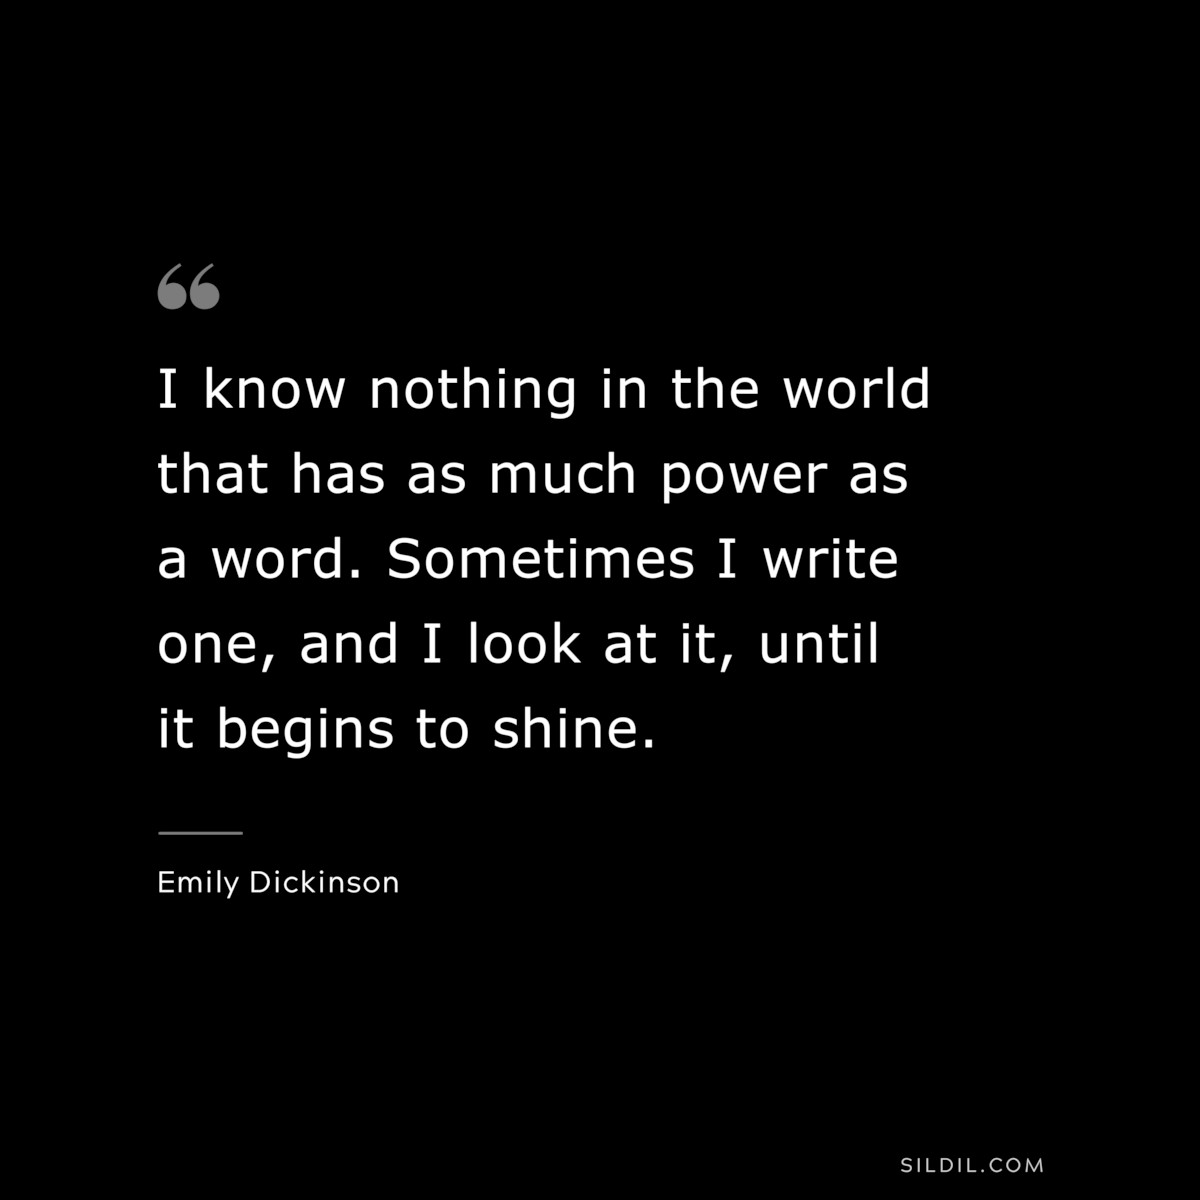 I know nothing in the world that has as much power as a word. Sometimes I write one, and I look at it, until it begins to shine.